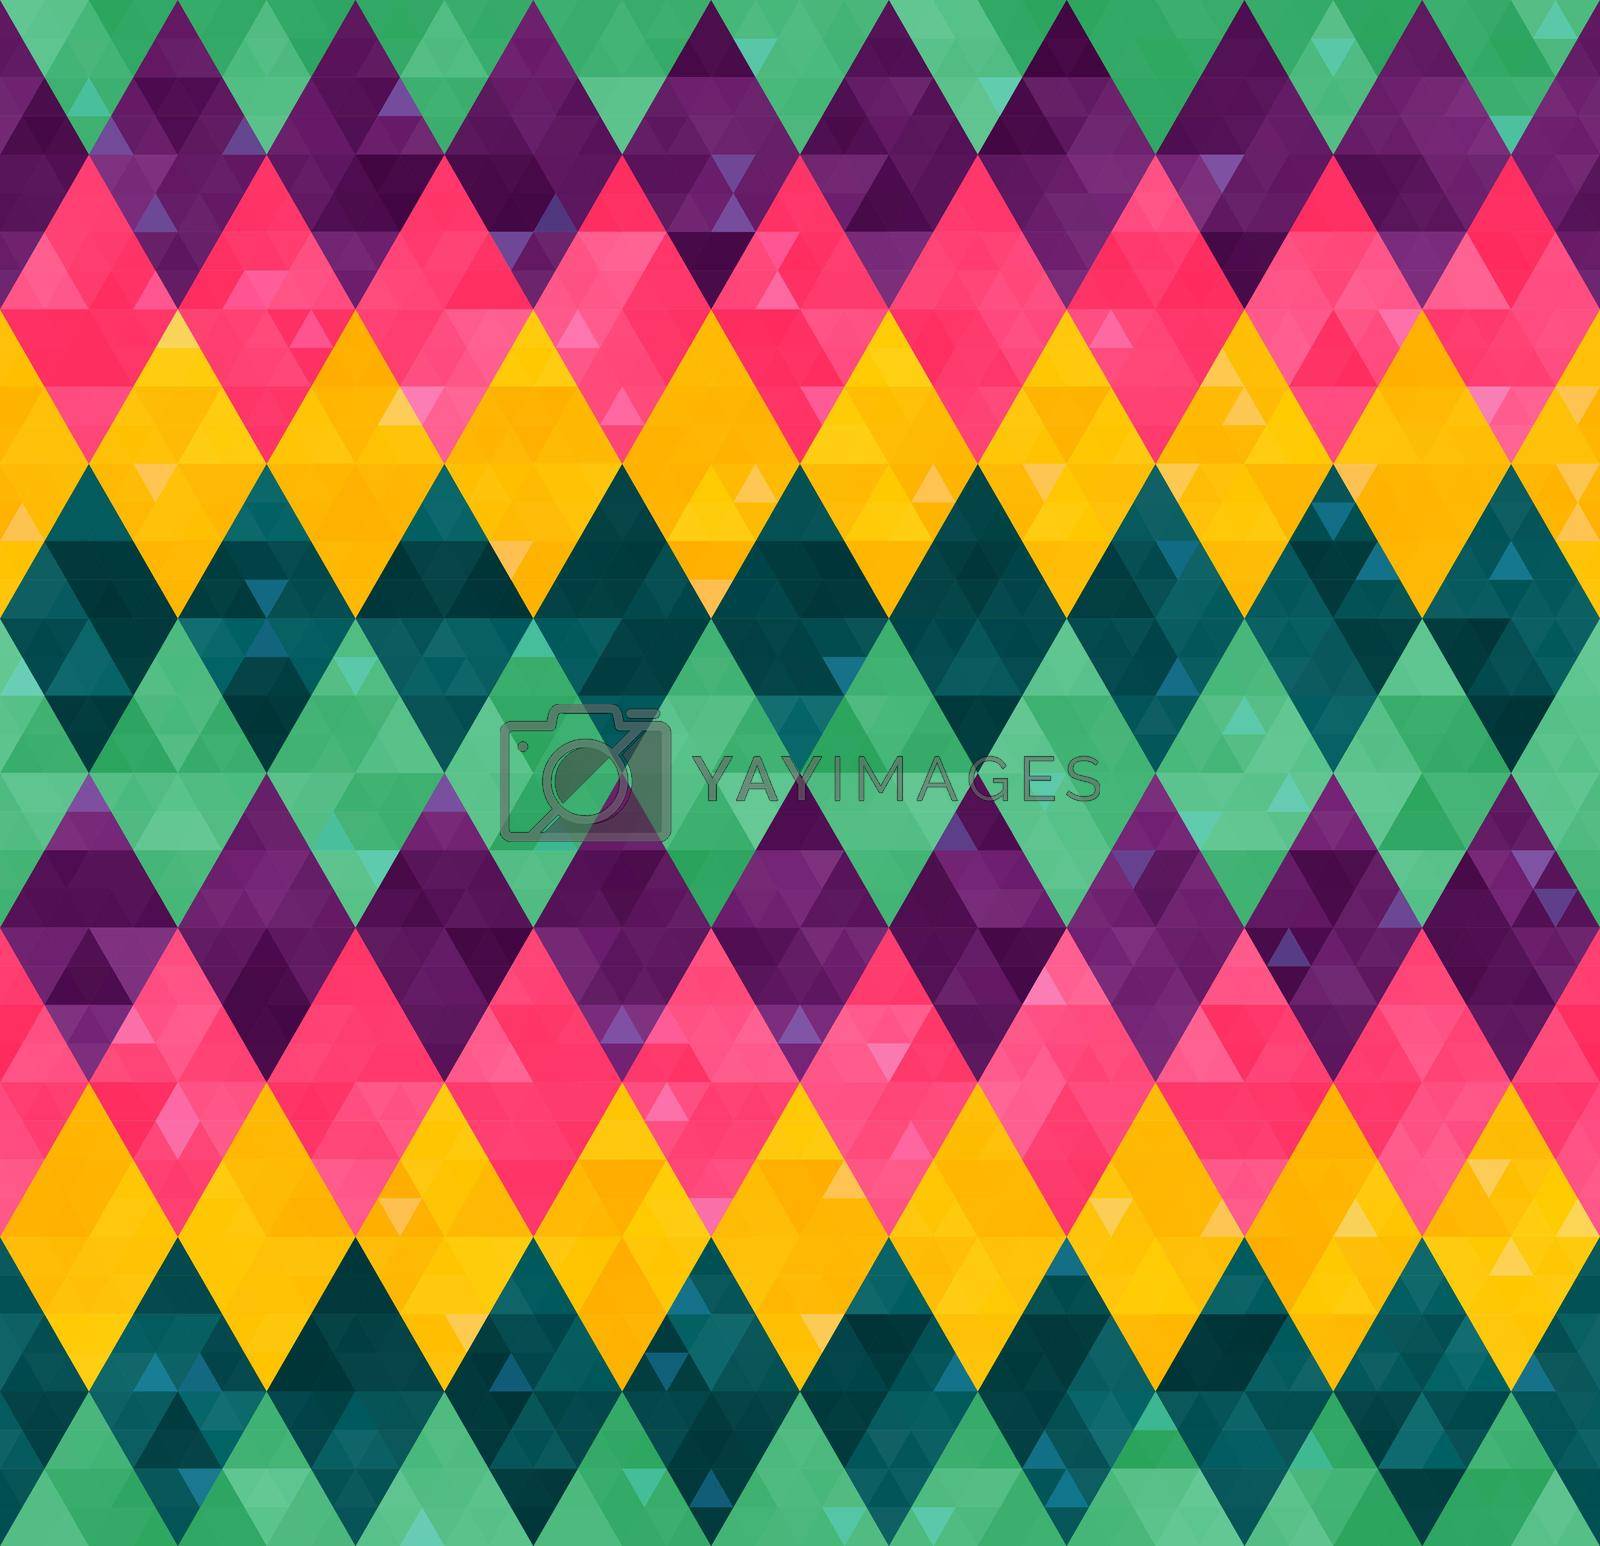 Royalty free image of Abstract geometric seamless harlequin pattern from rows of rhombuses in green, yellow, pink and purple by LanaLeta